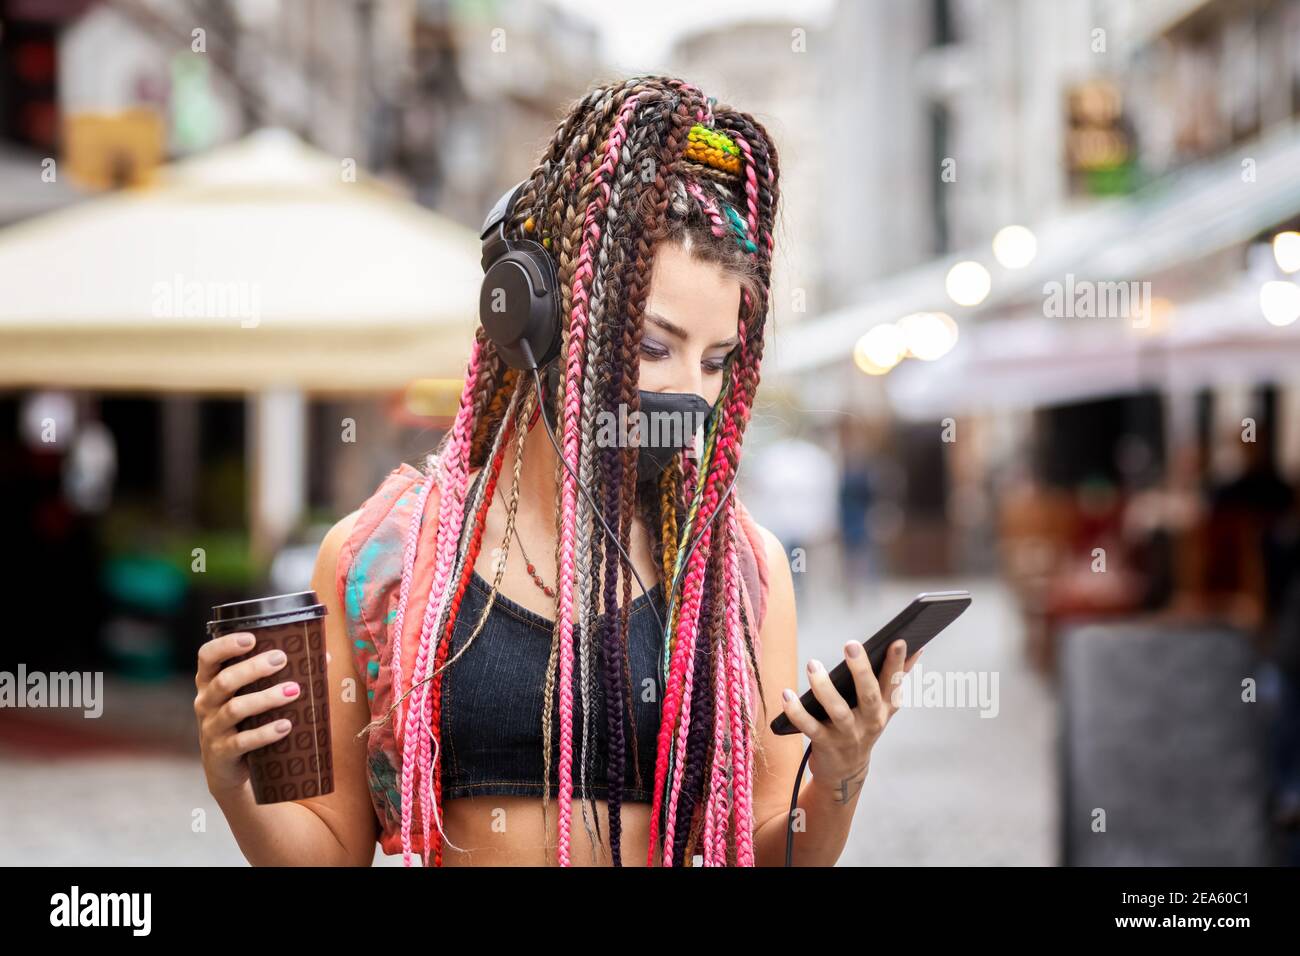 Playful cool rebel funky hipster young girl with face mask searching for playlist music on mobile phone while walking on city street Stock Photo